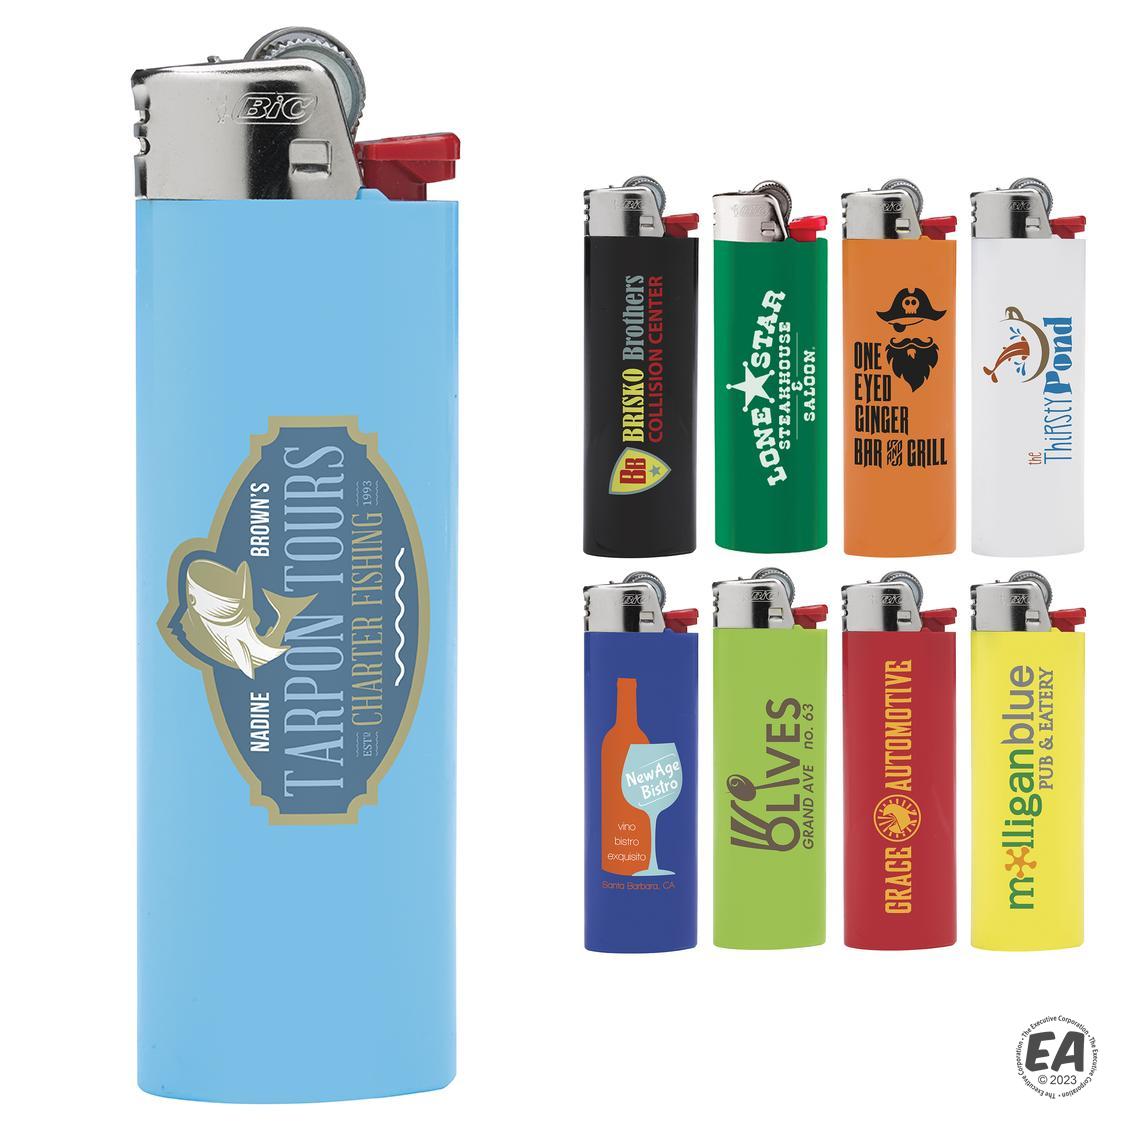 Promotional BIC Lighter J26 with Child Guard